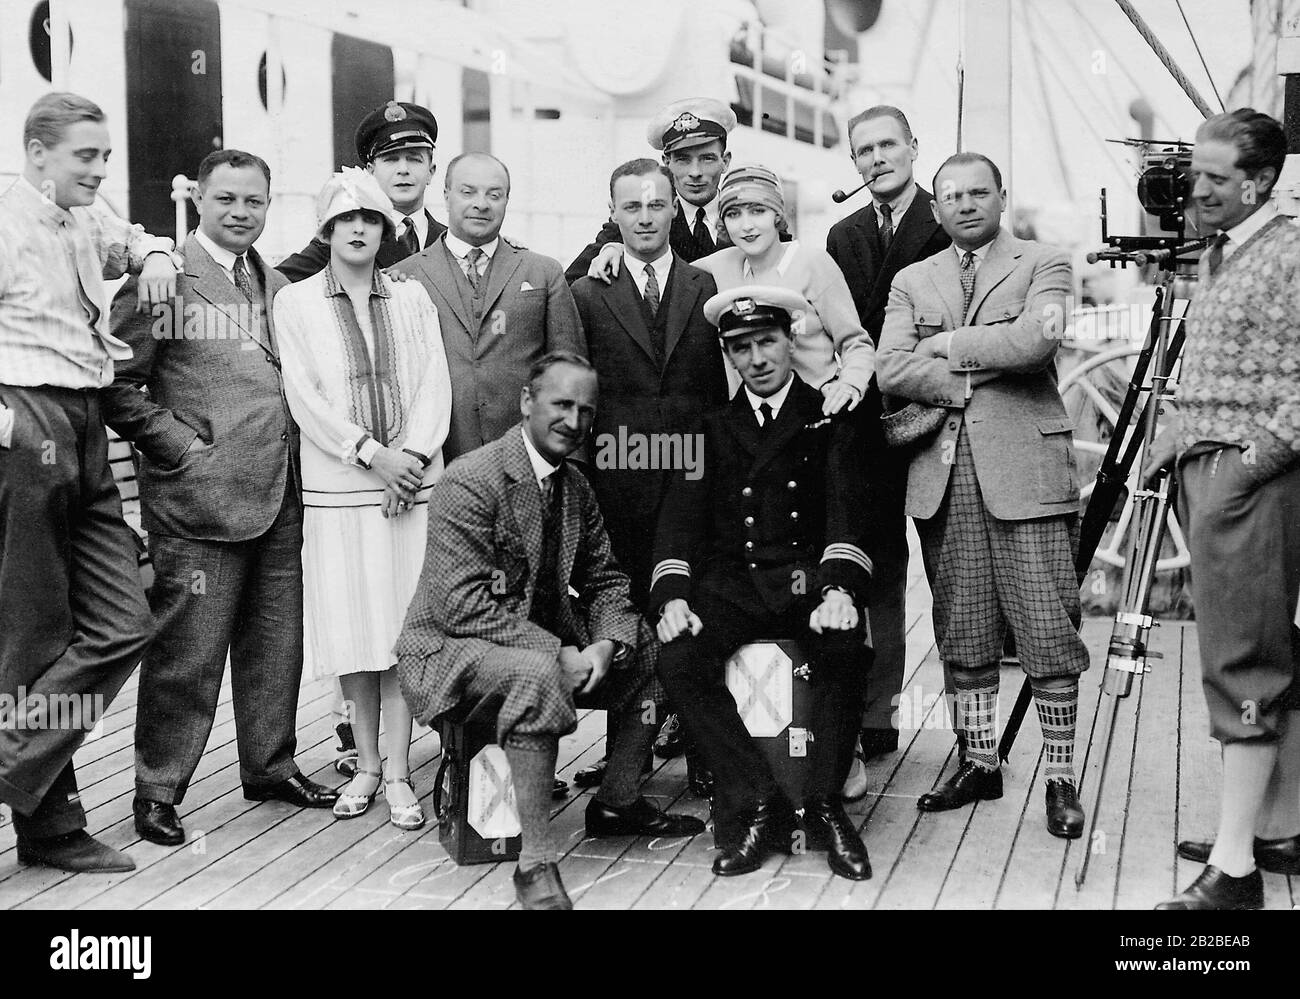 The director Georg Jacoby with his team during a shooting on a ship. Undated photo, probably from the 1930s. Stock Photo